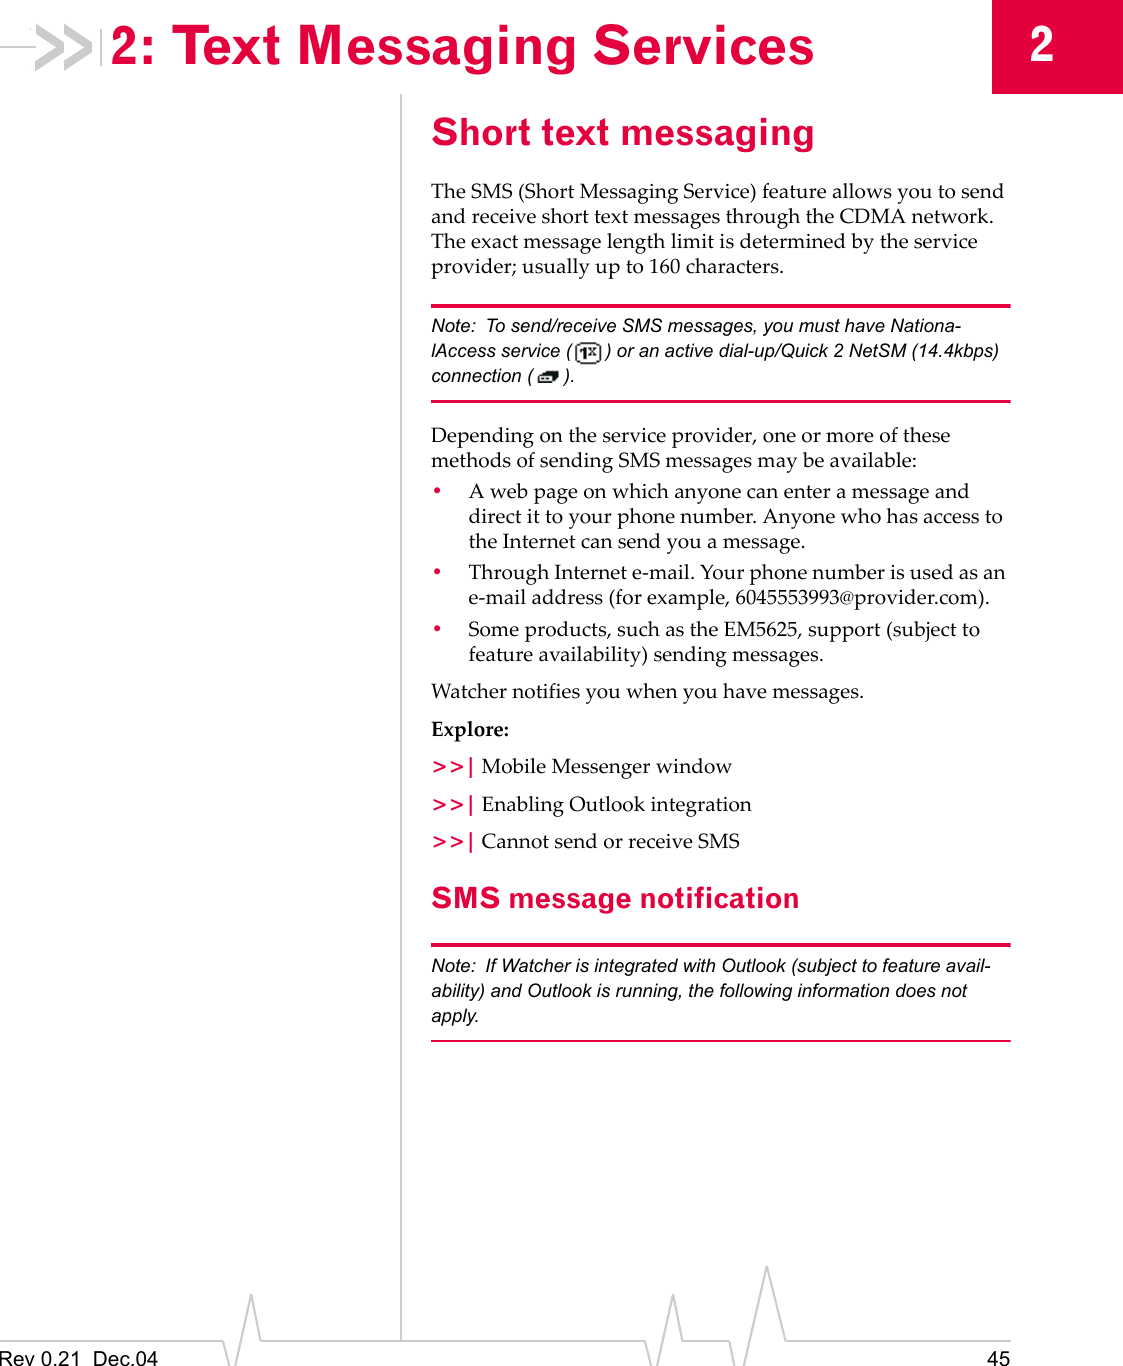 Rev 0.21  Dec.04 4522: Text Messaging ServicesShort text messagingThe SMS (Short Messaging Service) feature allows you to send and receive short text messages through the CDMA network. The exact message length limit is determined by the service provider; usually up to 160 characters.Note: To send/receive SMS messages, you must have Nationa-lAccess service ( ) or an active dial-up/Quick 2 NetSM (14.4kbps) connection ( ).Depending on the service provider, one or more of these methods of sending SMS messages may be available:•A web page on which anyone can enter a message and direct it to your phone number. Anyone who has access to the Internet can send you a message.•Through Internet e-mail. Your phone number is used as an e-mail address (for example, 6045553993@provider.com).•Some products, such as the EM5625, support (subject to feature availability) sending messages.Watcher notifies you when you have messages.Explore:&gt;&gt;| Mobile Messenger window&gt;&gt;| Enabling Outlook integration&gt;&gt;| Cannot send or receive SMSSMS message notificationNote: If Watcher is integrated with Outlook (subject to feature avail-ability) and Outlook is running, the following information does not apply.